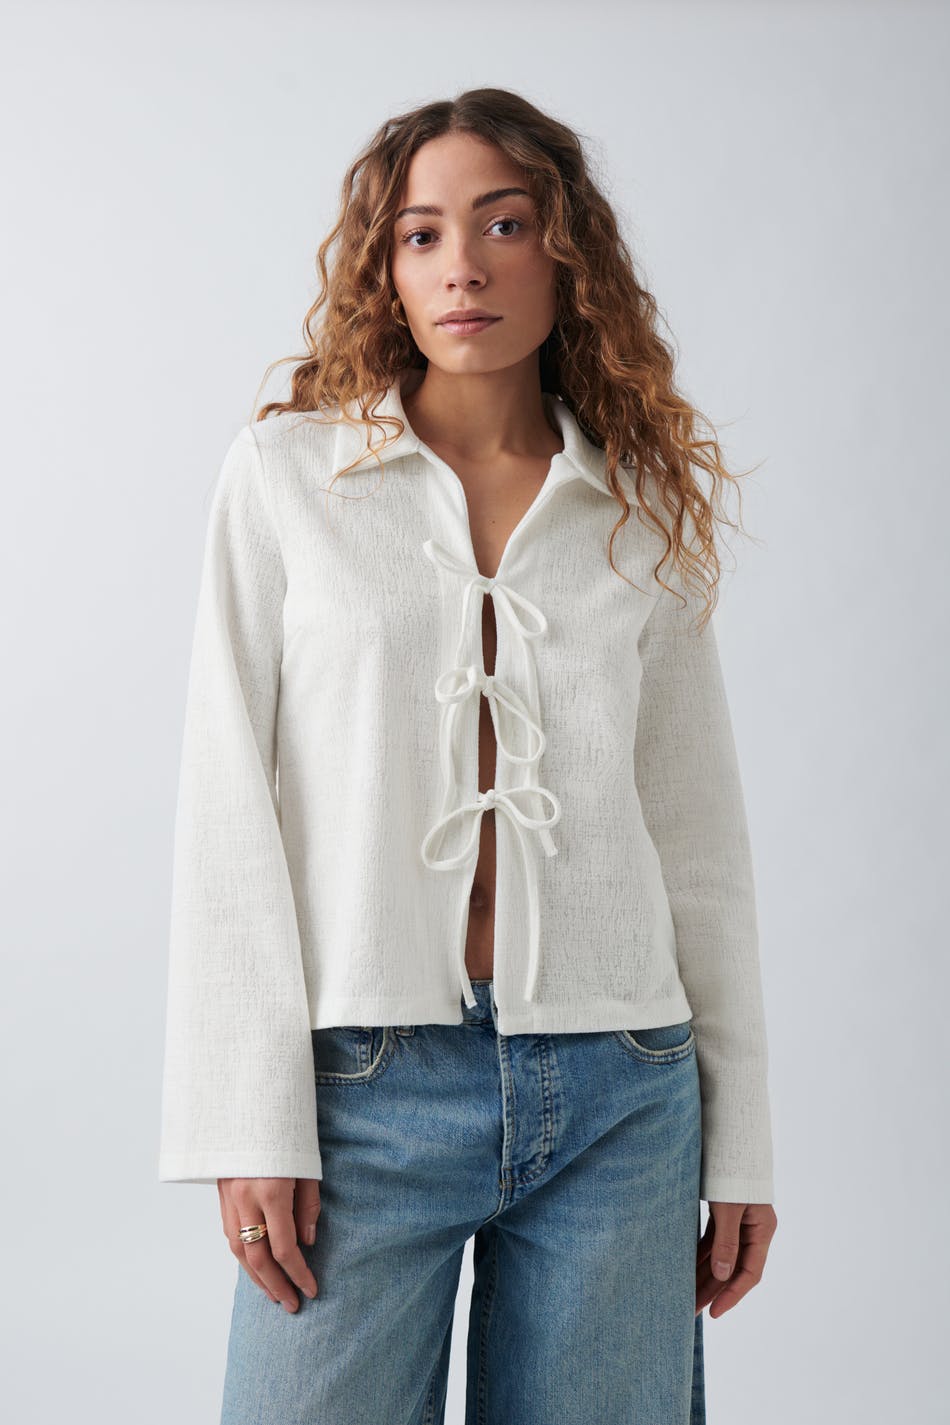 Sheer top - Offwhite - Women - Gina Tricot